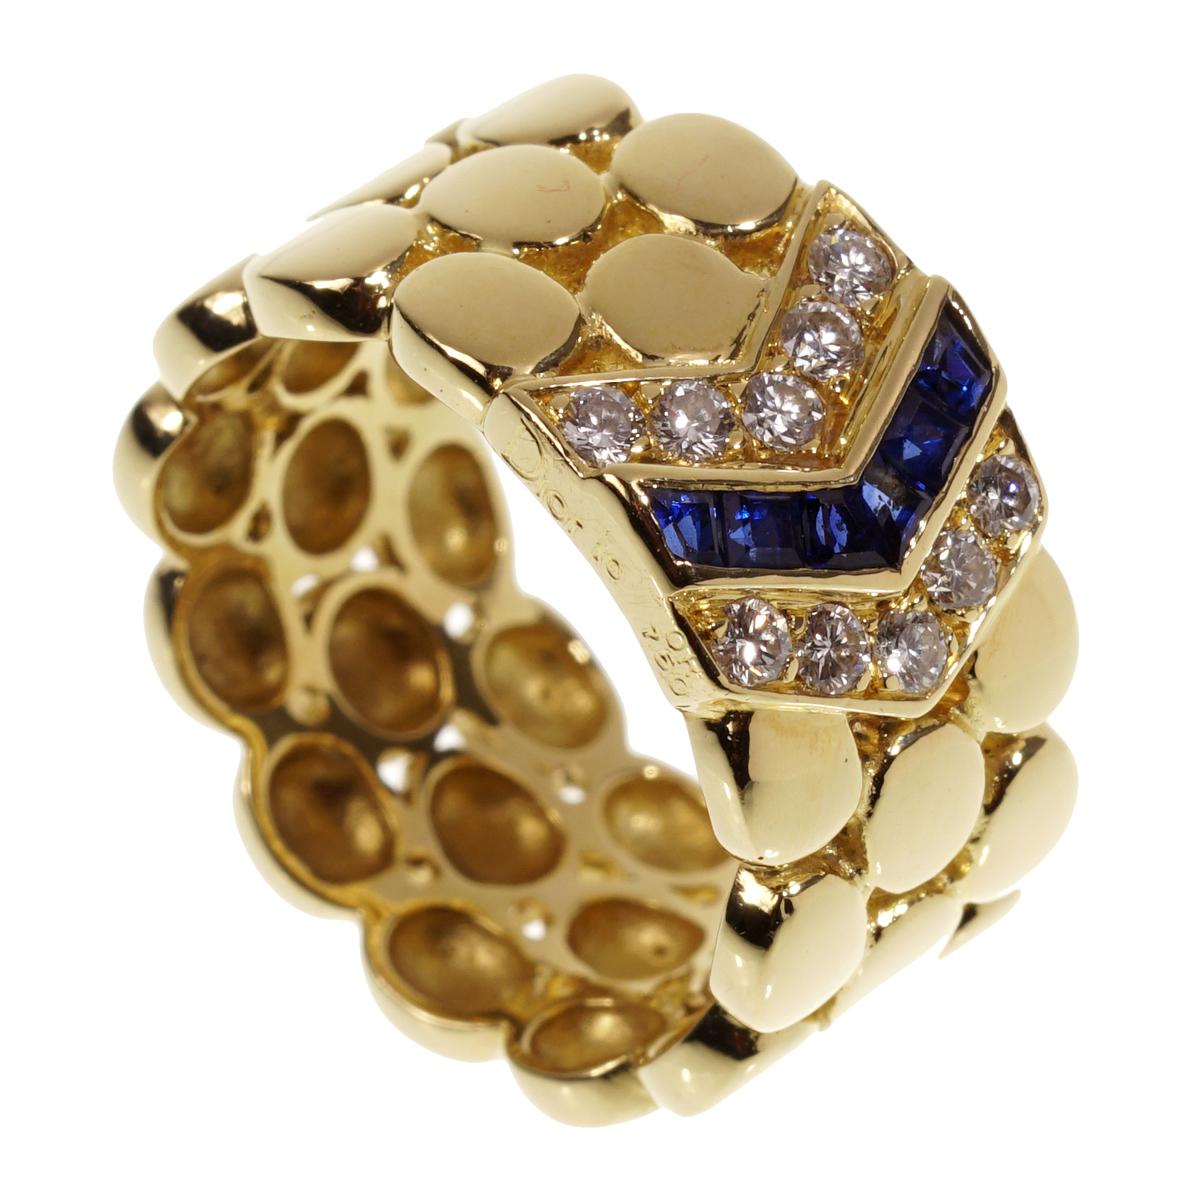 A chic Christian Dior ring showcasing a chevron motif adorned with sapphire and round brilliant cut diamonds in 18k yellow gold.

Size 6 1/2